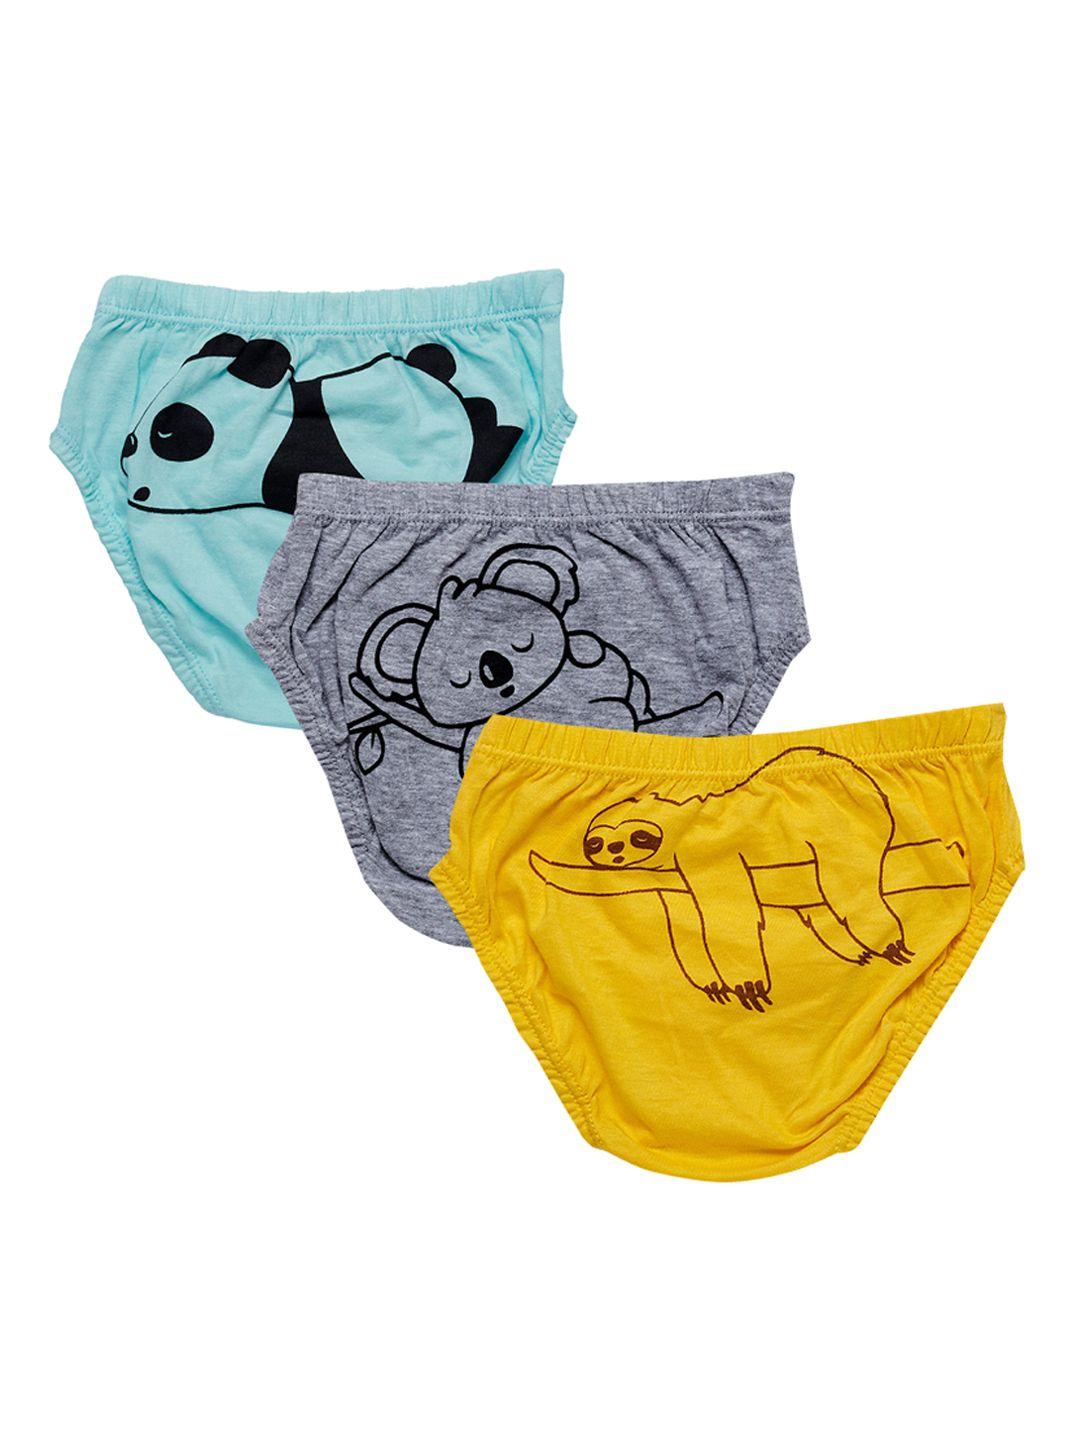 you-got-plan-b-boys-pack-of-3-pure-cotton-basic-briefs